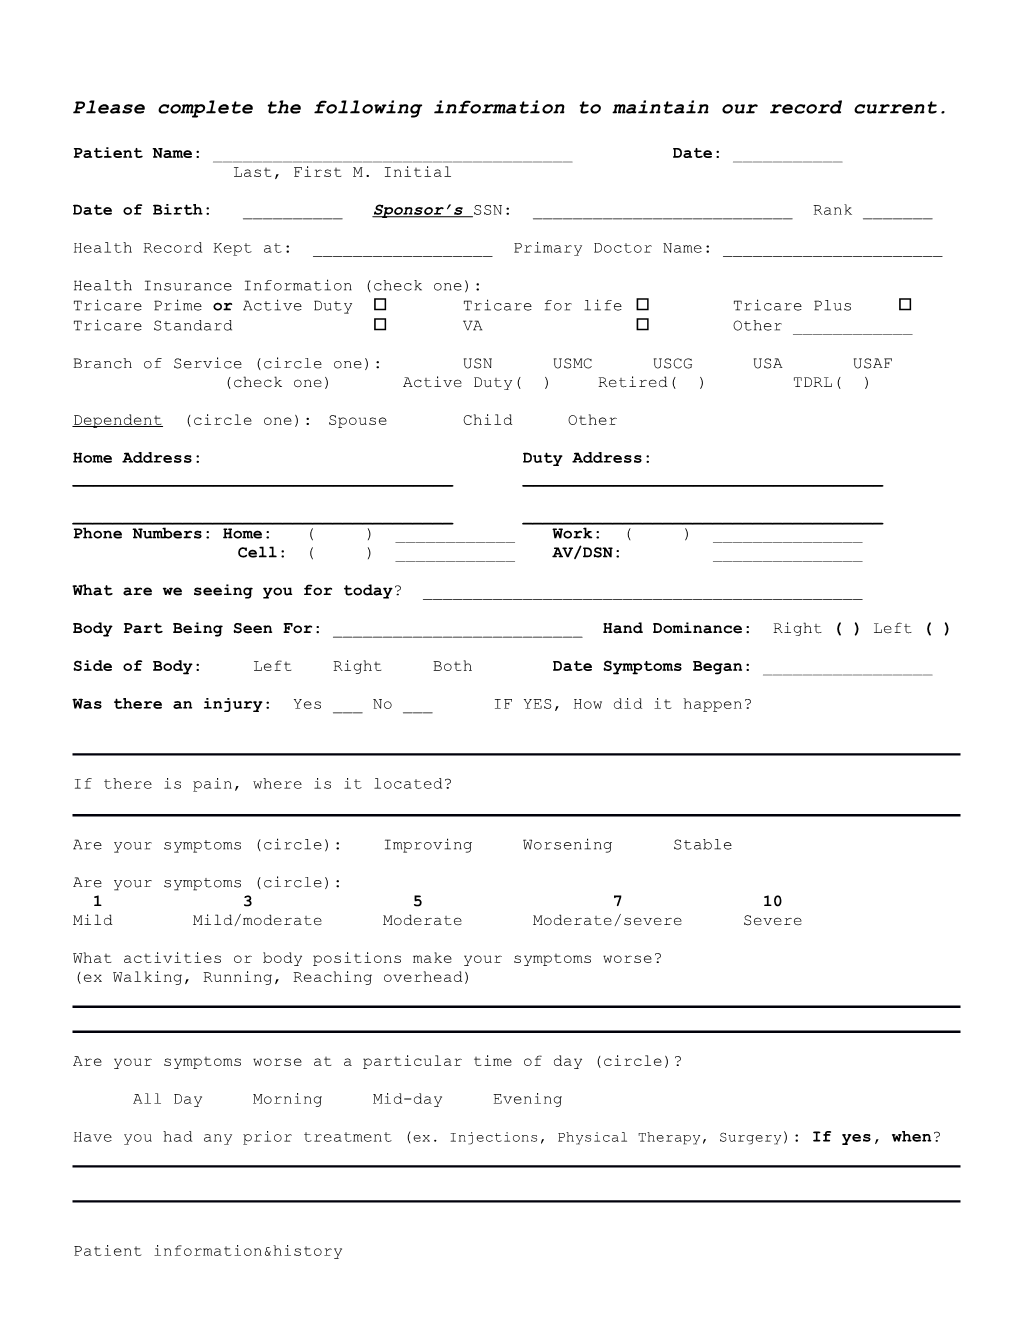 Please Fill out As Completely As Possible